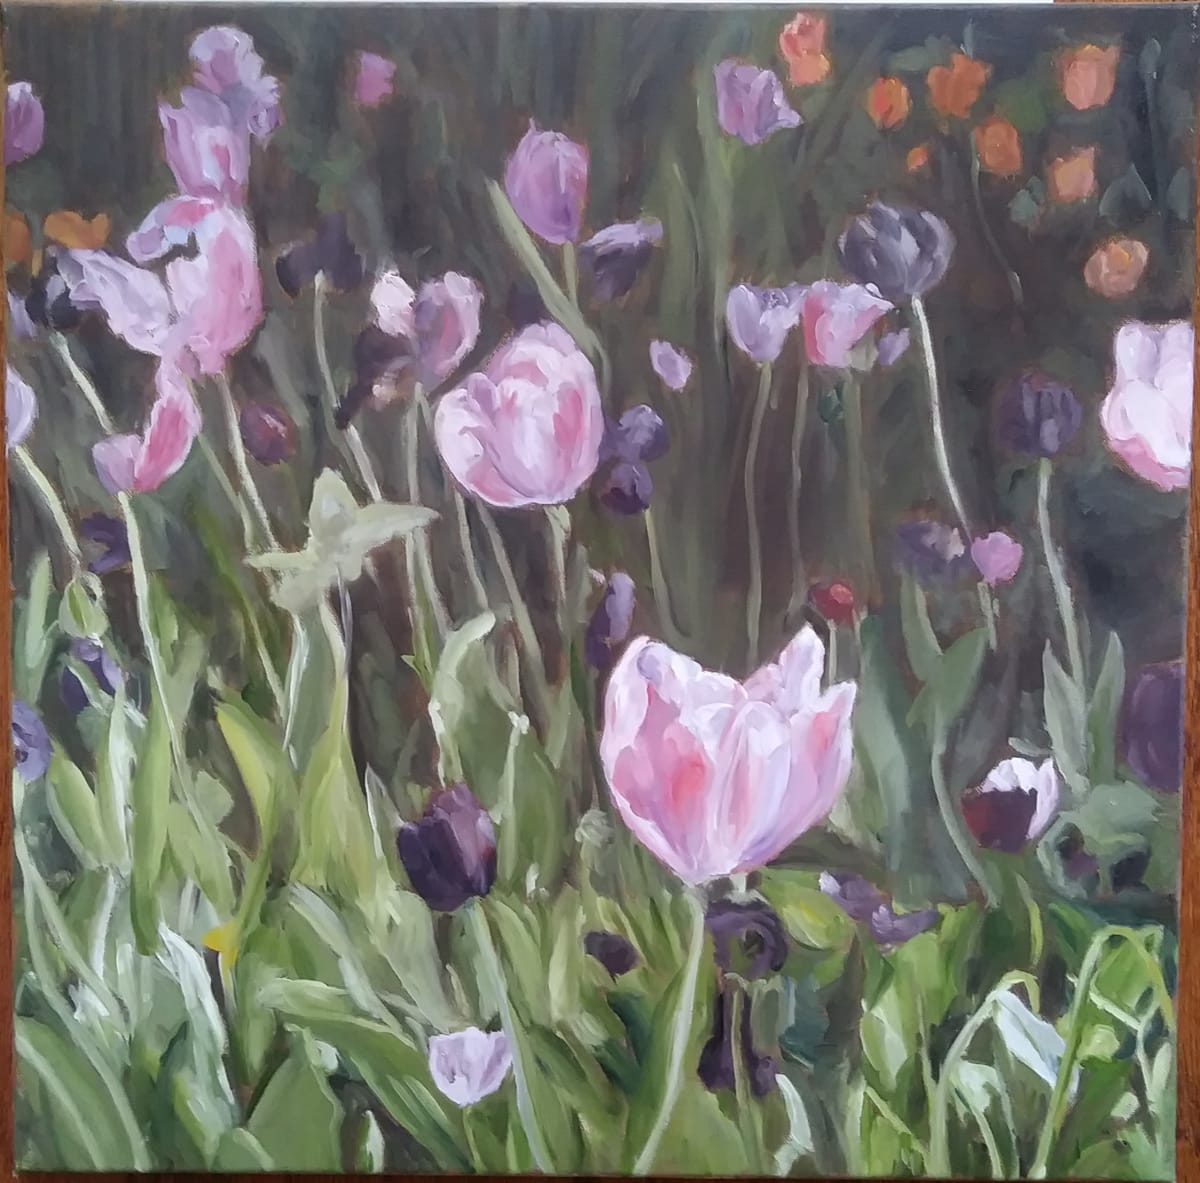 City Corner Tulips by Karla Mulry  Image: In many, one as a sentinel bloom catches the light